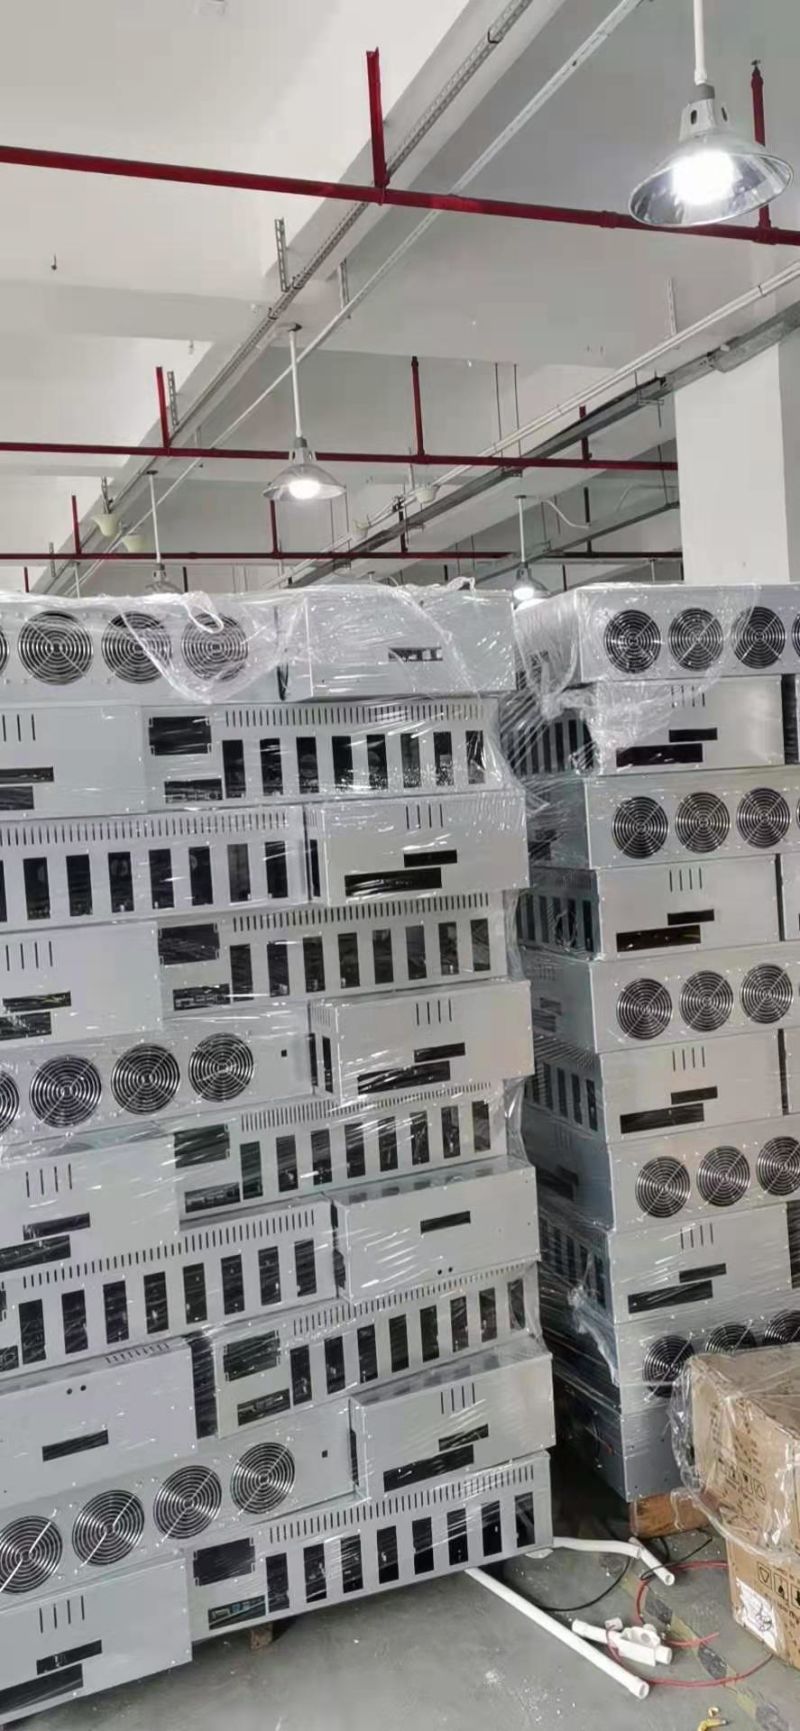 2021 Hot Selling Brand New Pandaminer B7 230mh 1150W Graphics Cards Miner